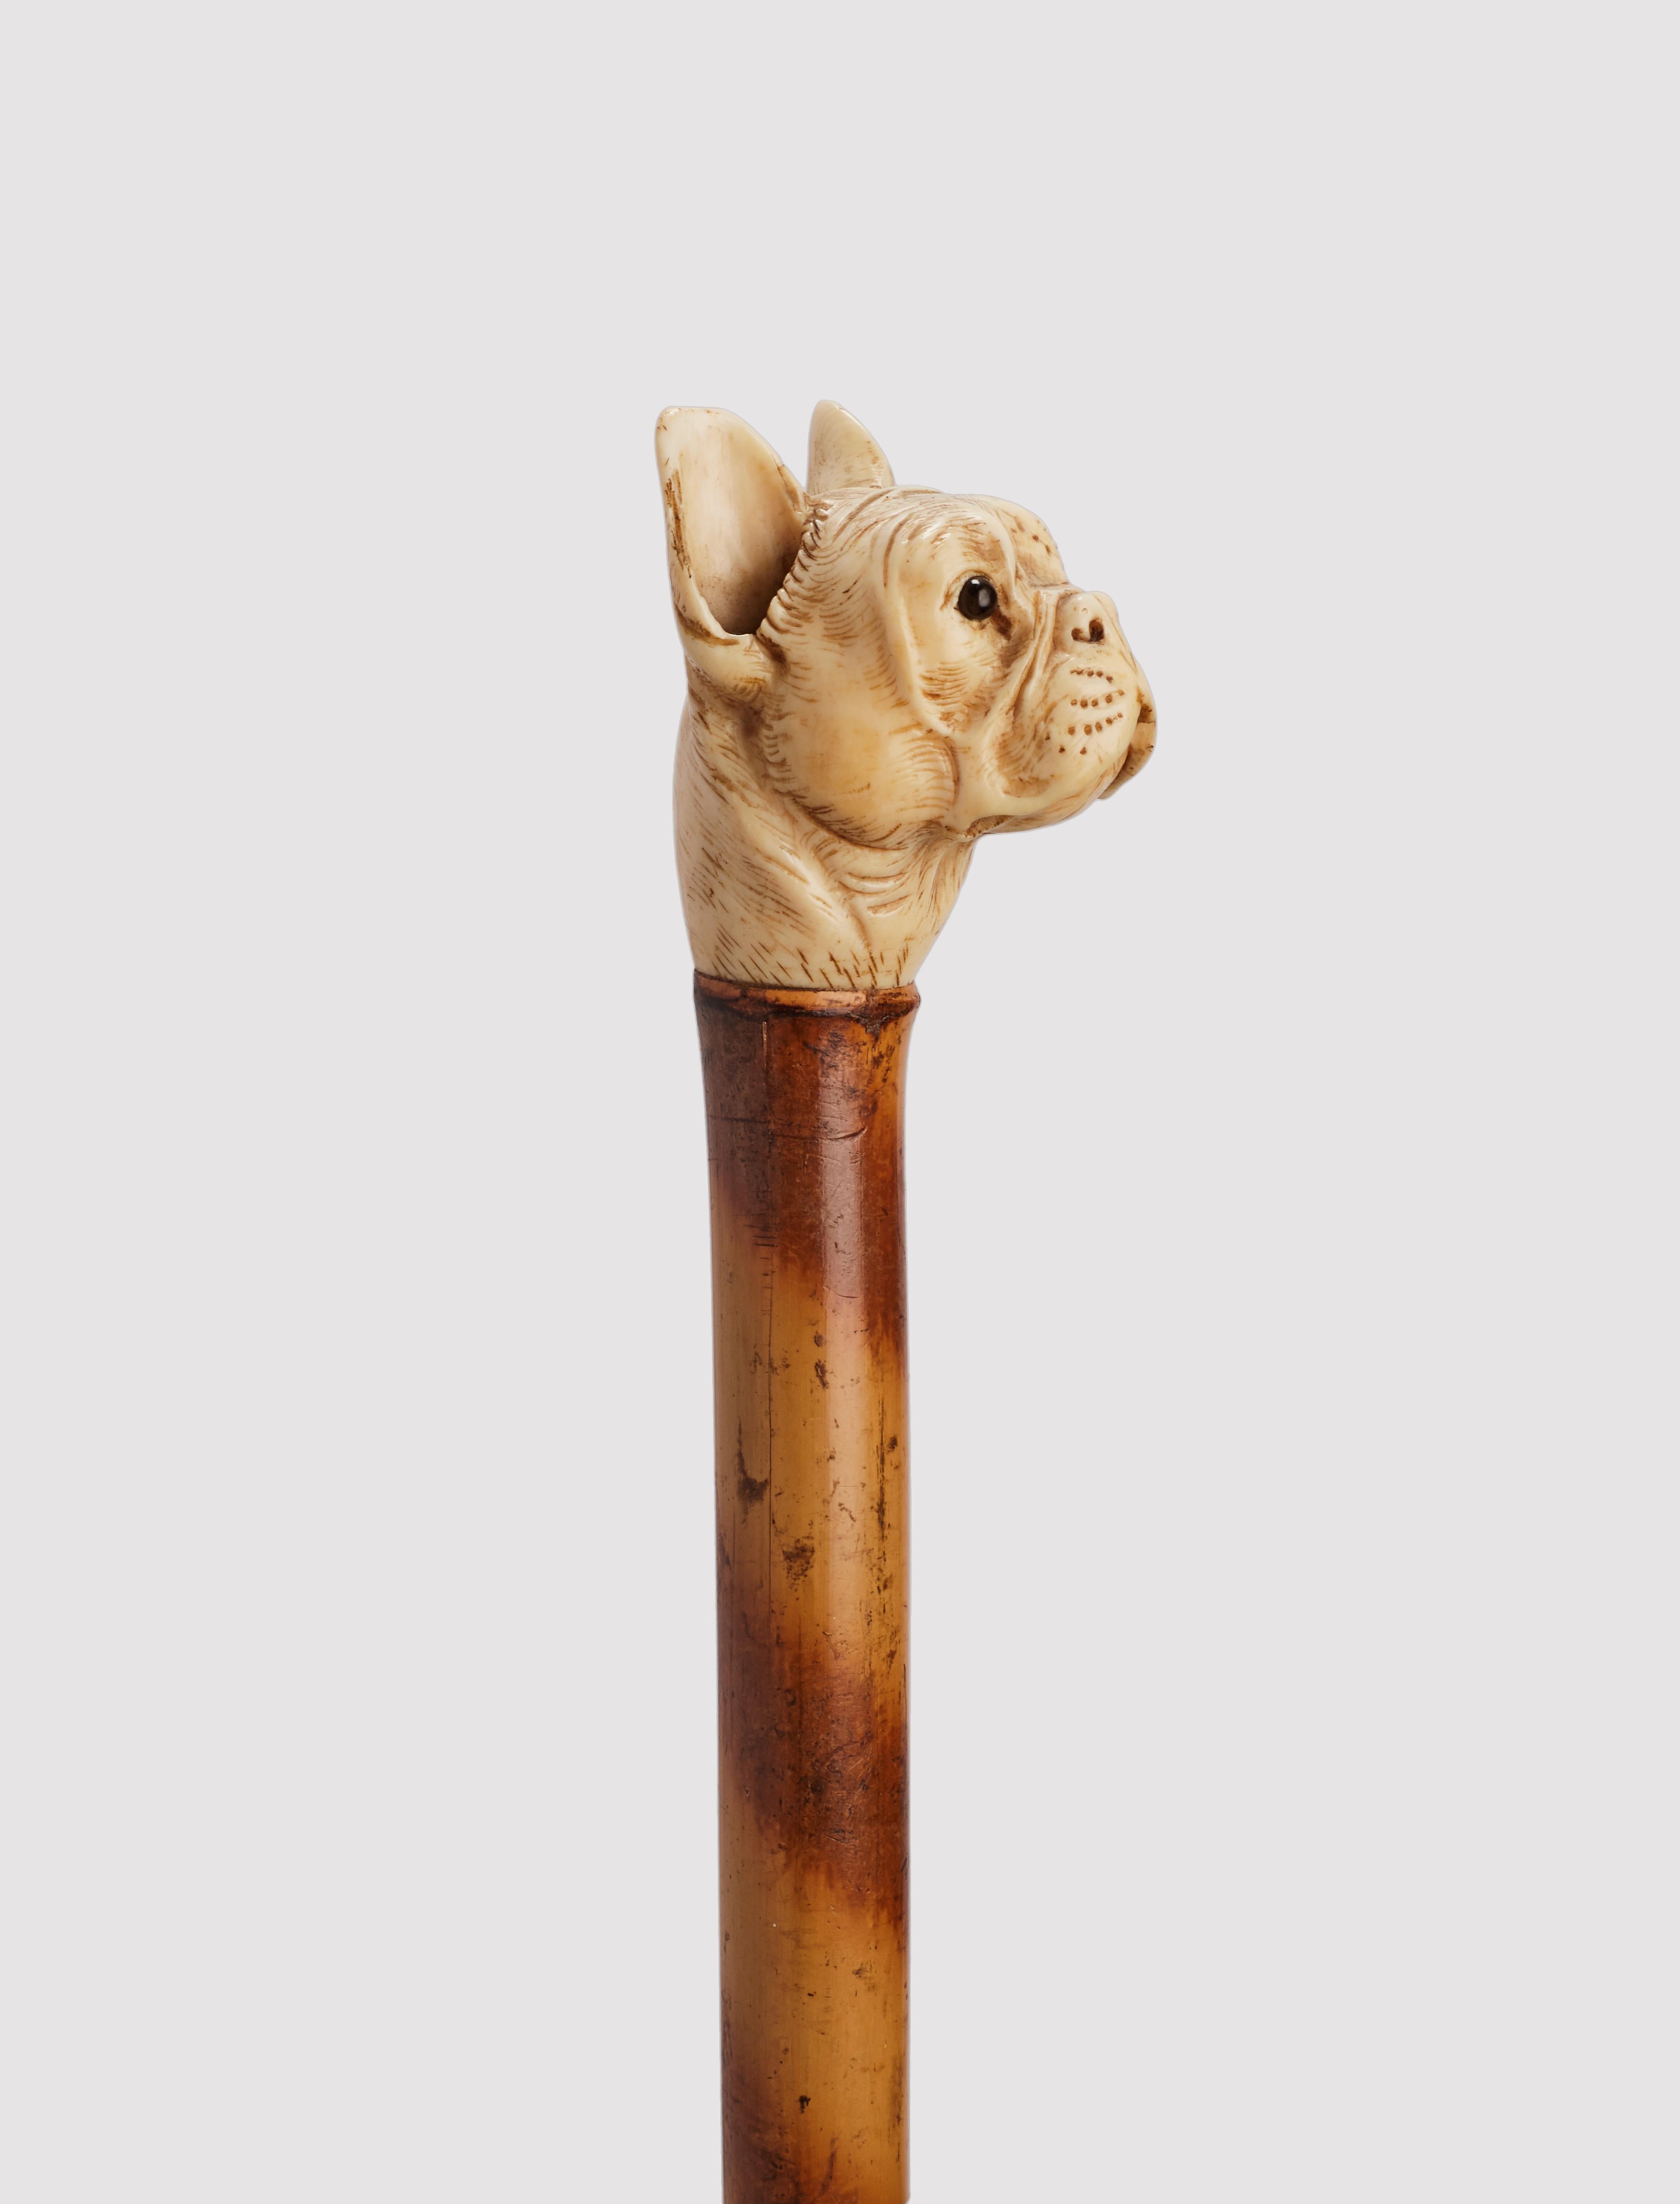 Walking stick: ivory carved handle, depicting a French bulldog head. Bamboo wood shaft. Sulphur glass eyes. Metal ferrule. France circa 1890.
(SHIP TO EU ONLY)
